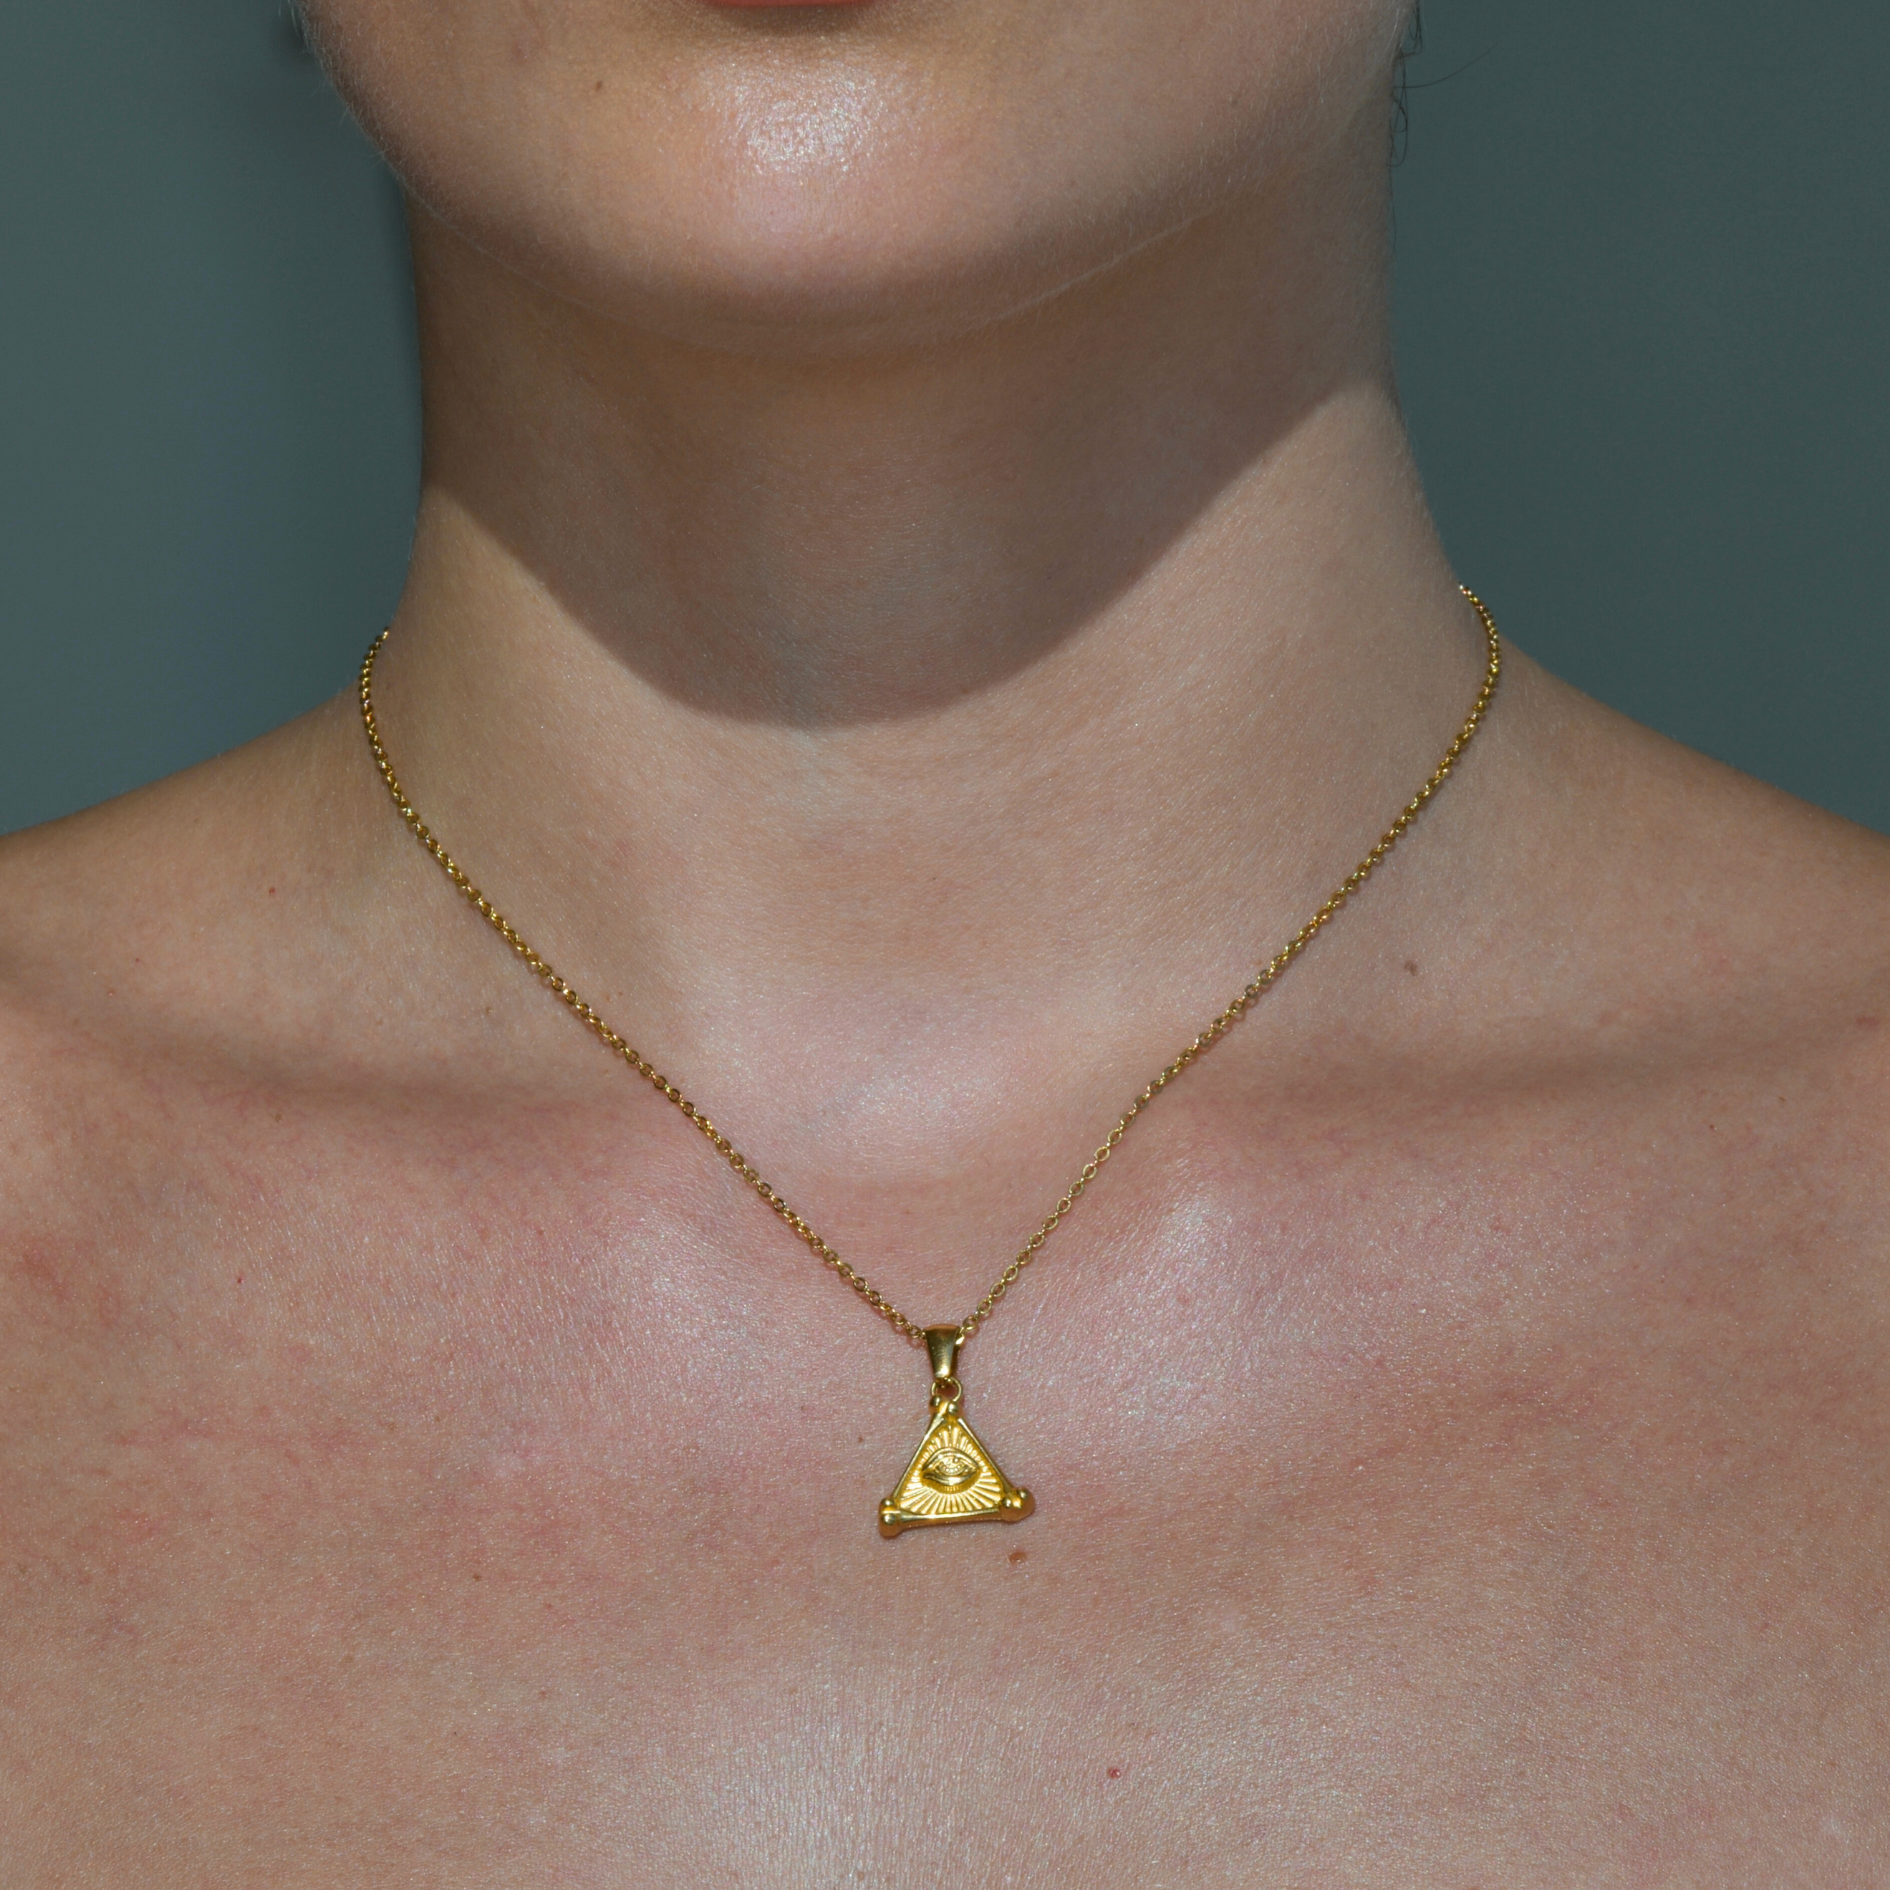 Gold Necklace. the pendant has the shape of a pyramid with an eye in the middle of the rays inside the pyramid surface. Pyramid Pendant Gold Necklace.